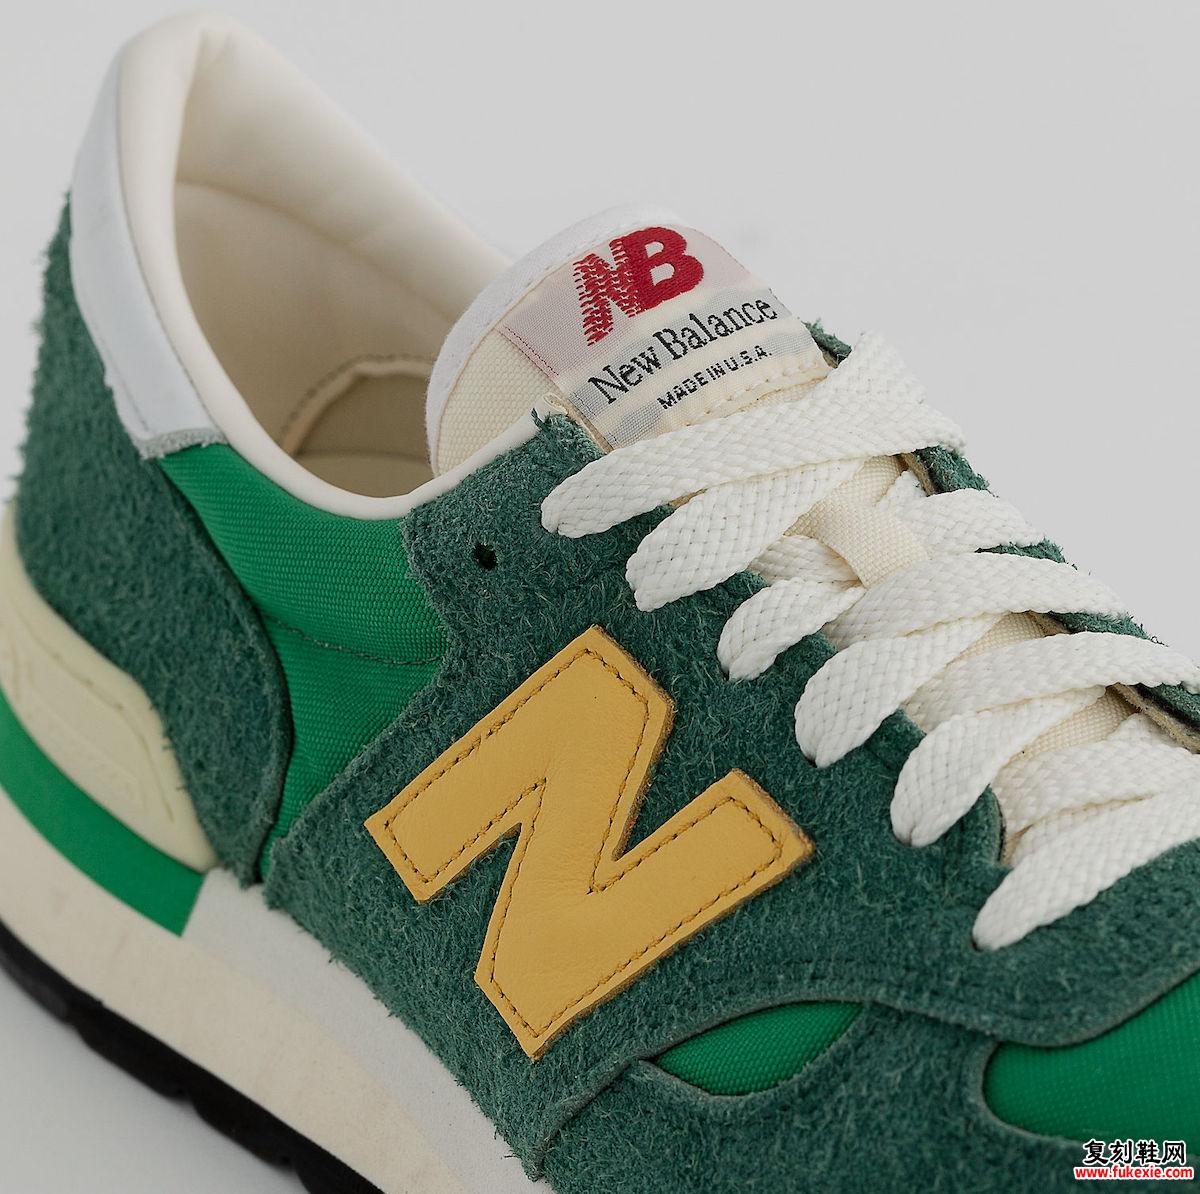 NEW BALANCE 990 MADE IN USA “GREEN/GOLDEN YELLOW” 3 月 30 日发布